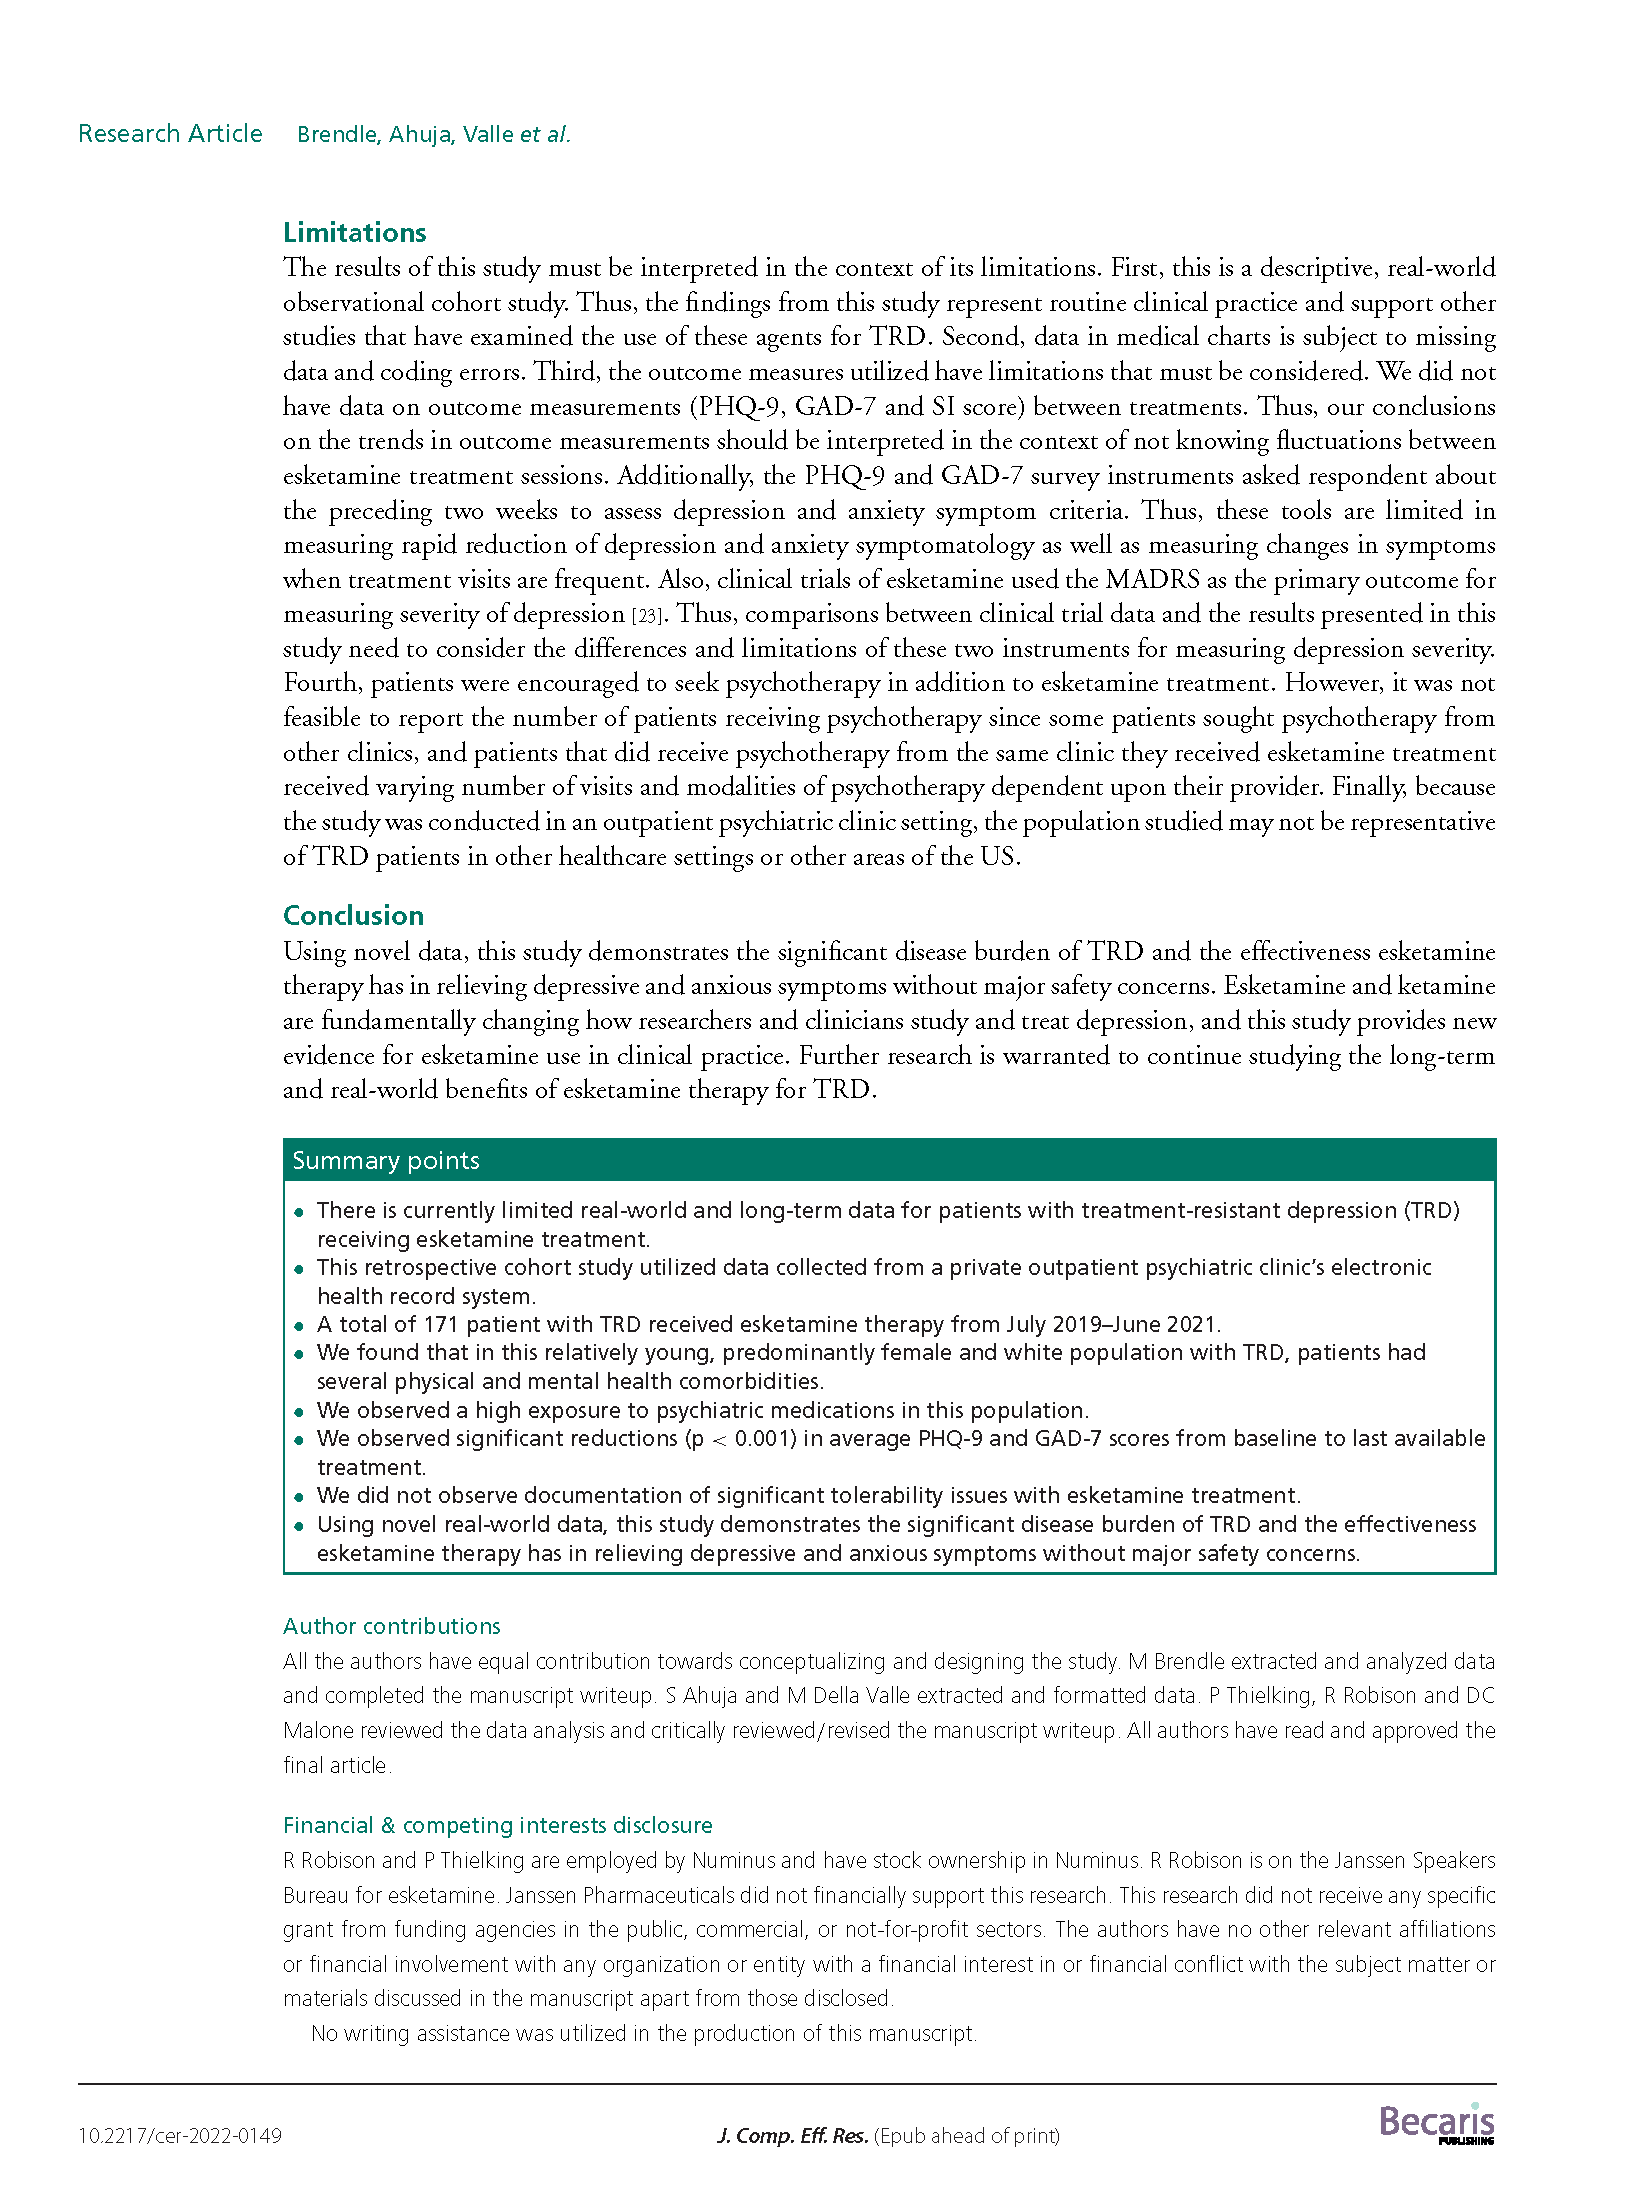 Safety and effectiveness of intranasal esketamine for TRD_a real-world retrospective study_Brendle 2022 (1)_Page_12.png